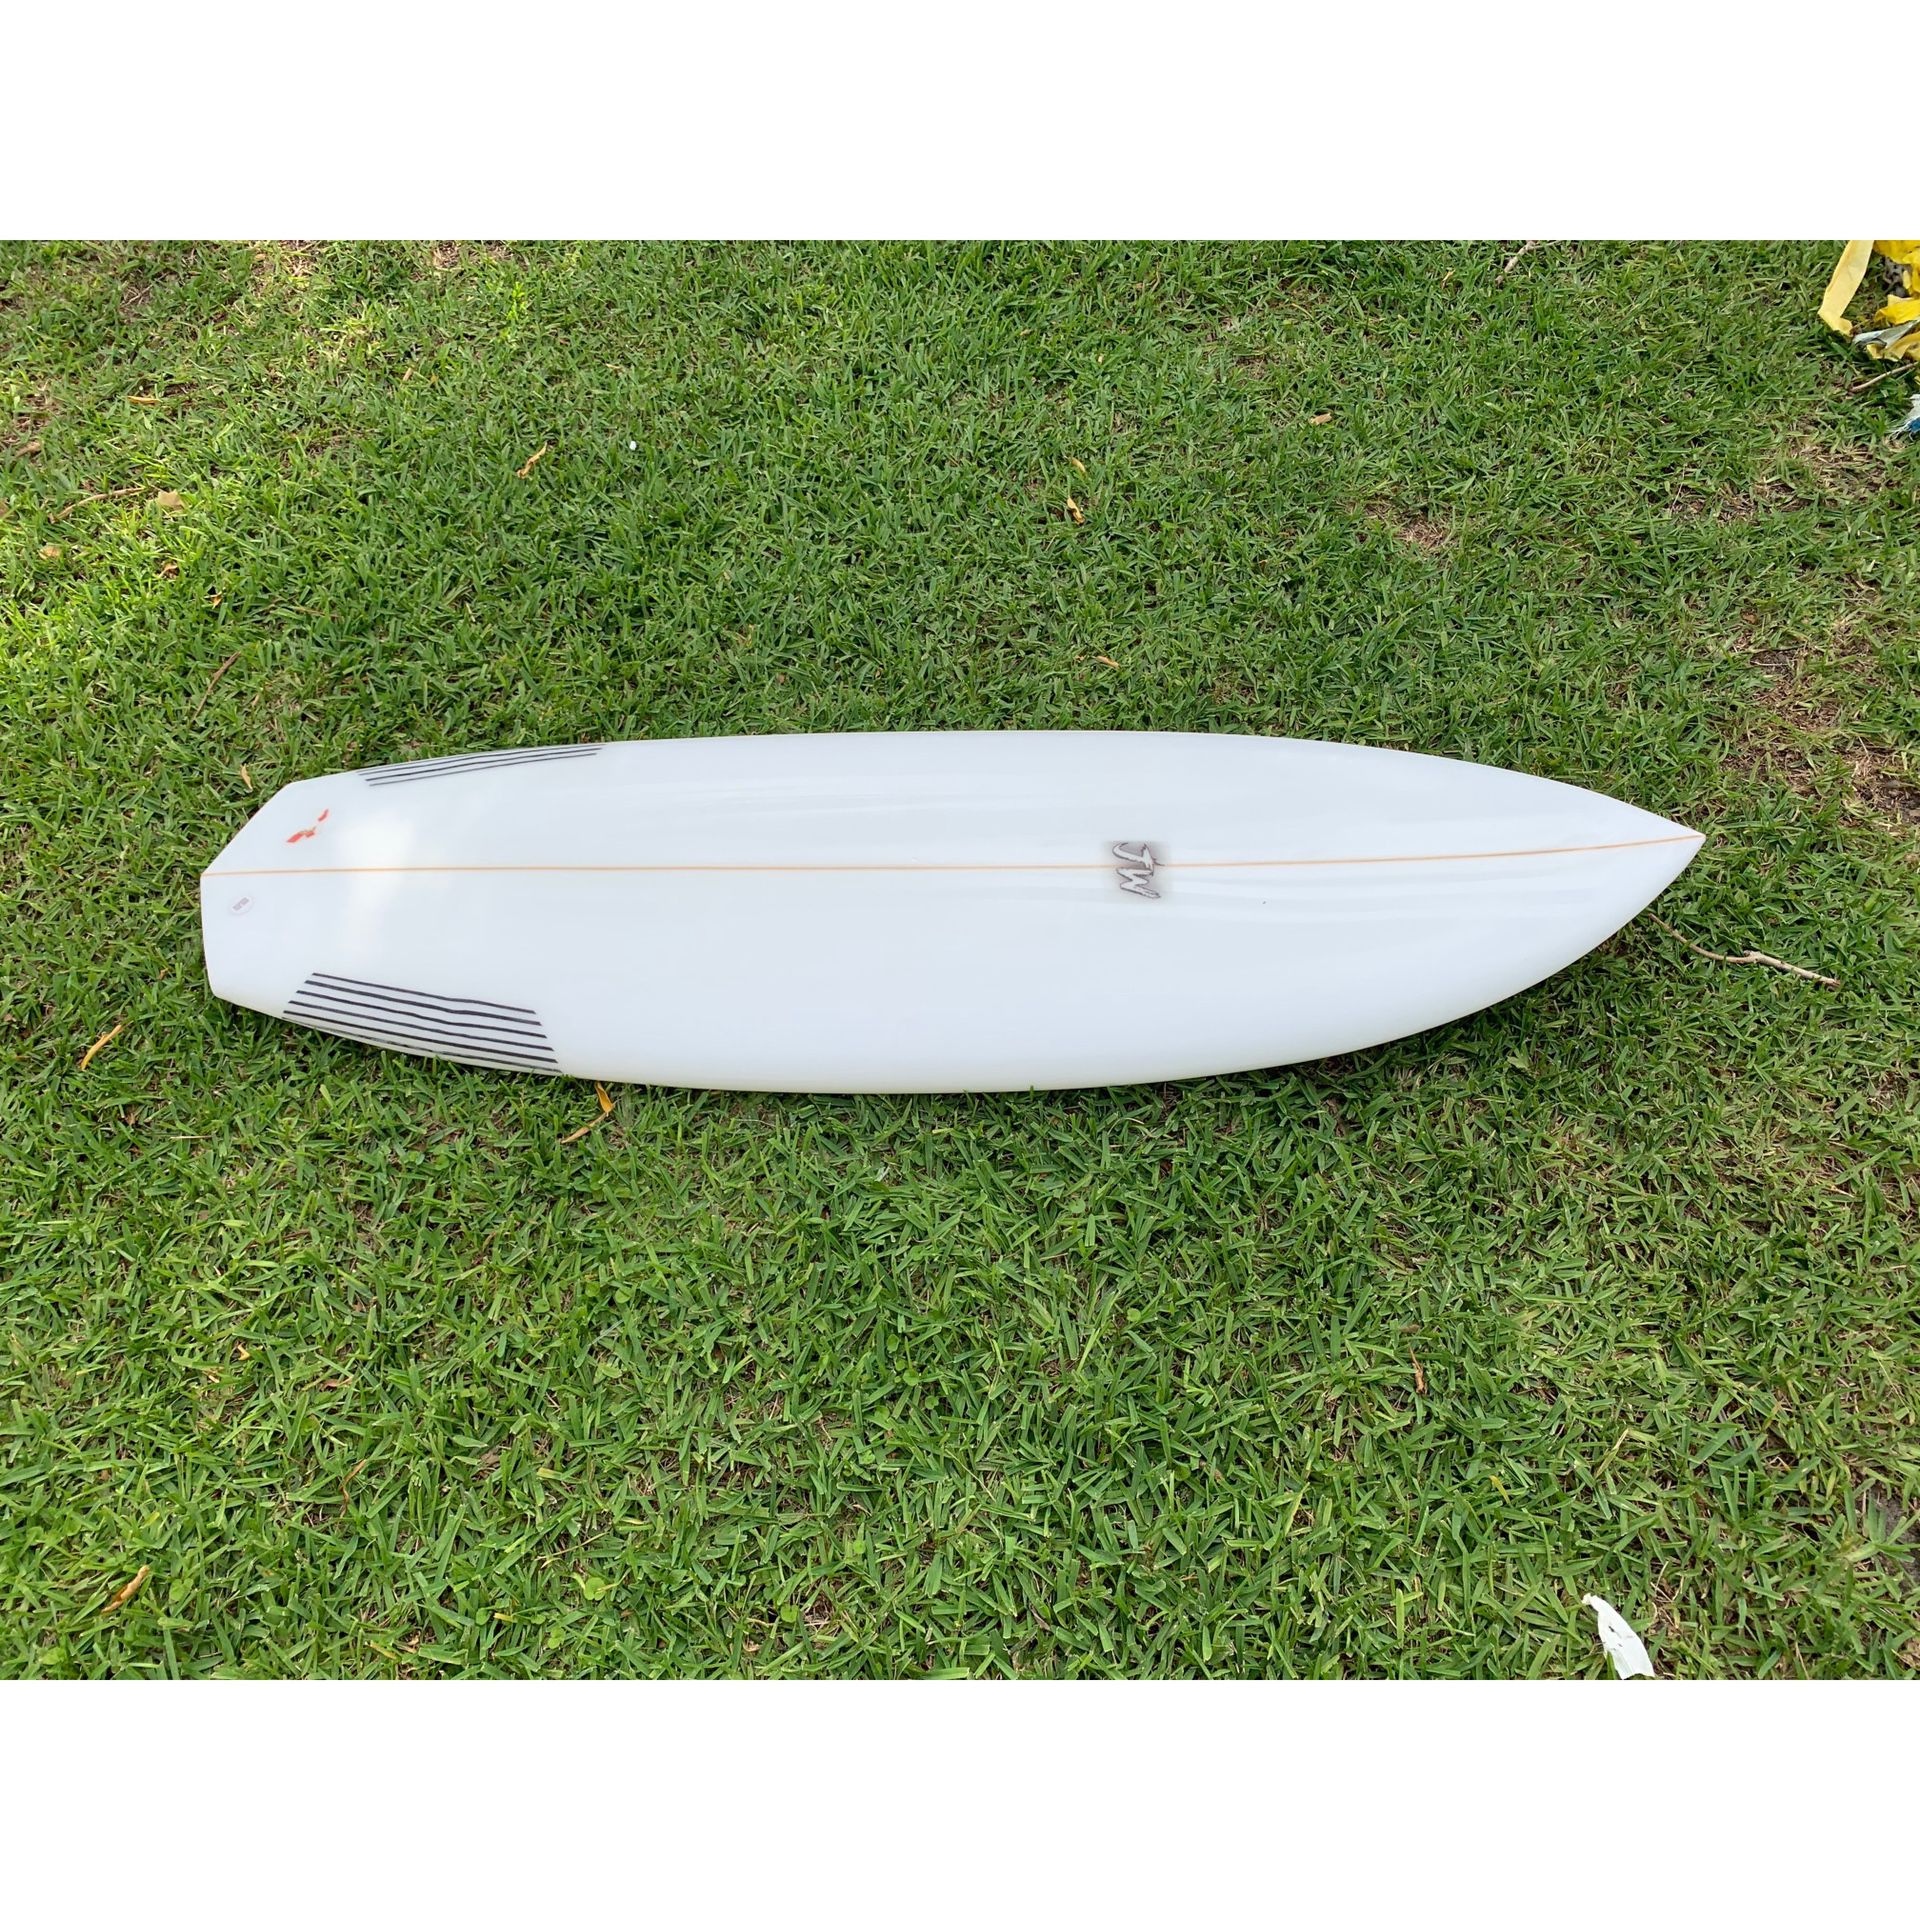 5’7 poly surfboard